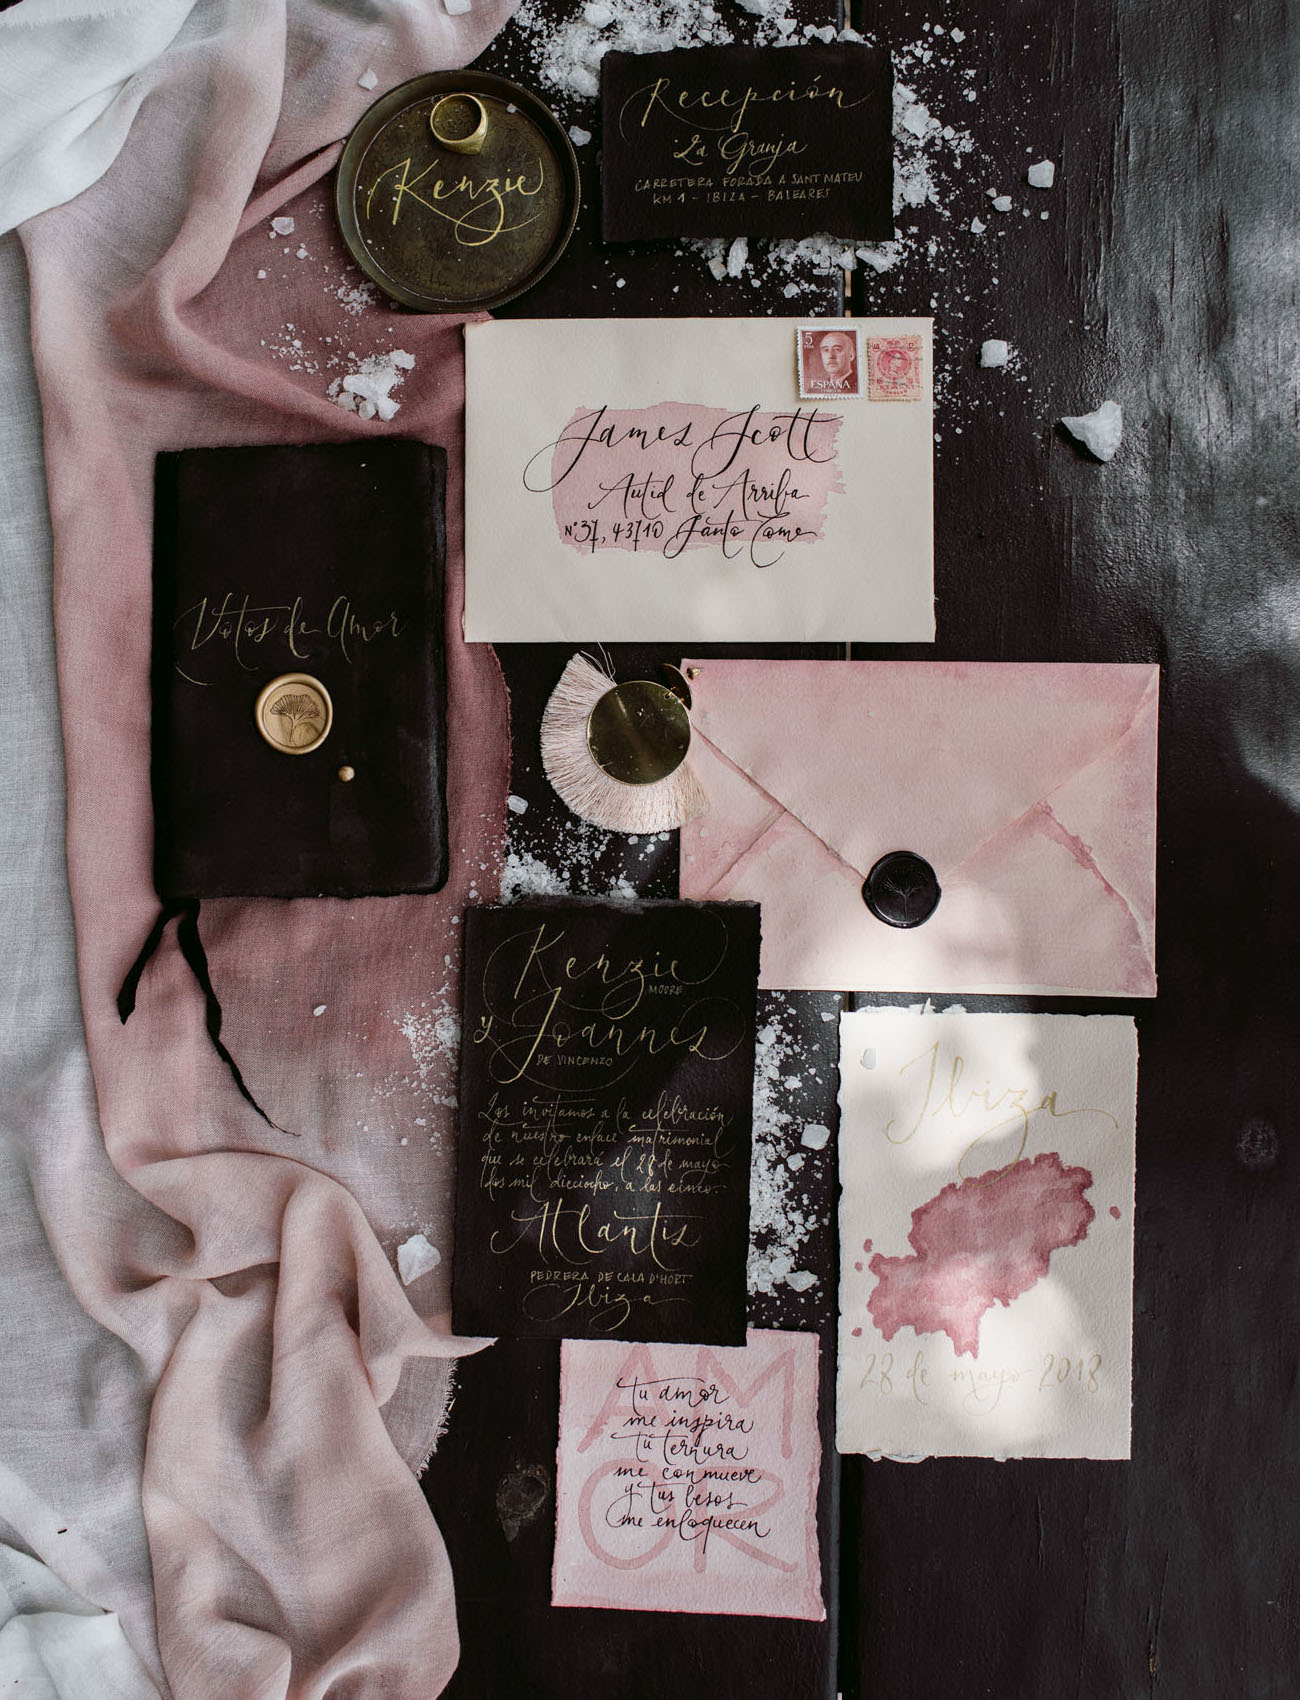 The wedding invitation suite was done in black and pink as the bride's hair is pink